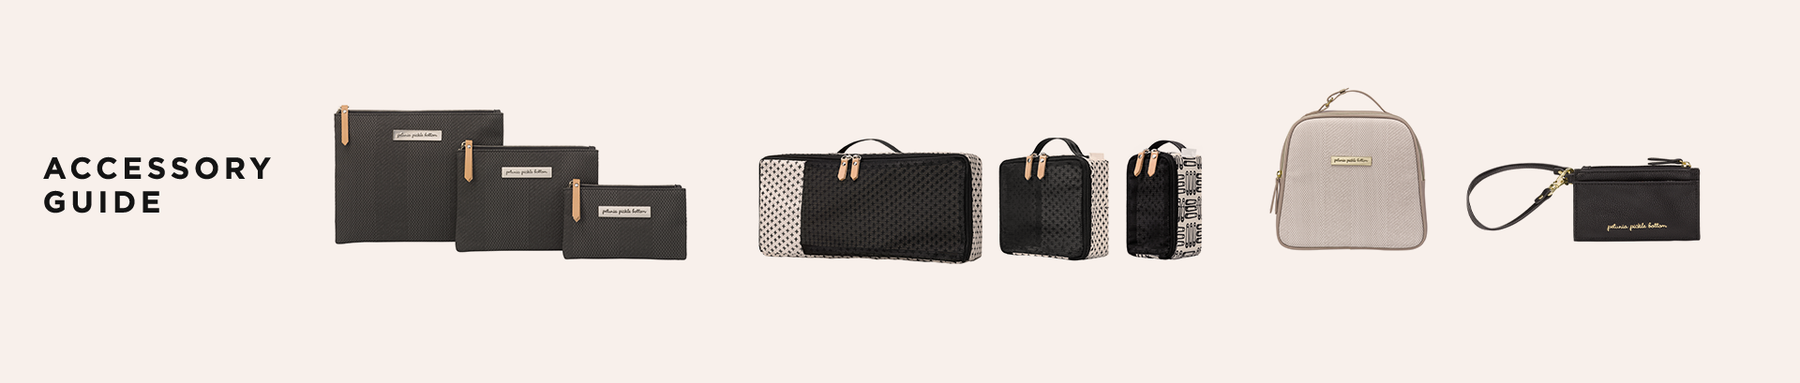 accessory guide. featuring the organizer trio in carbon cable stitch, packing pixels in positive, tandem tote and lunch bag in grey matte cable stitch, and petunia pickle bottom wallet wristlet